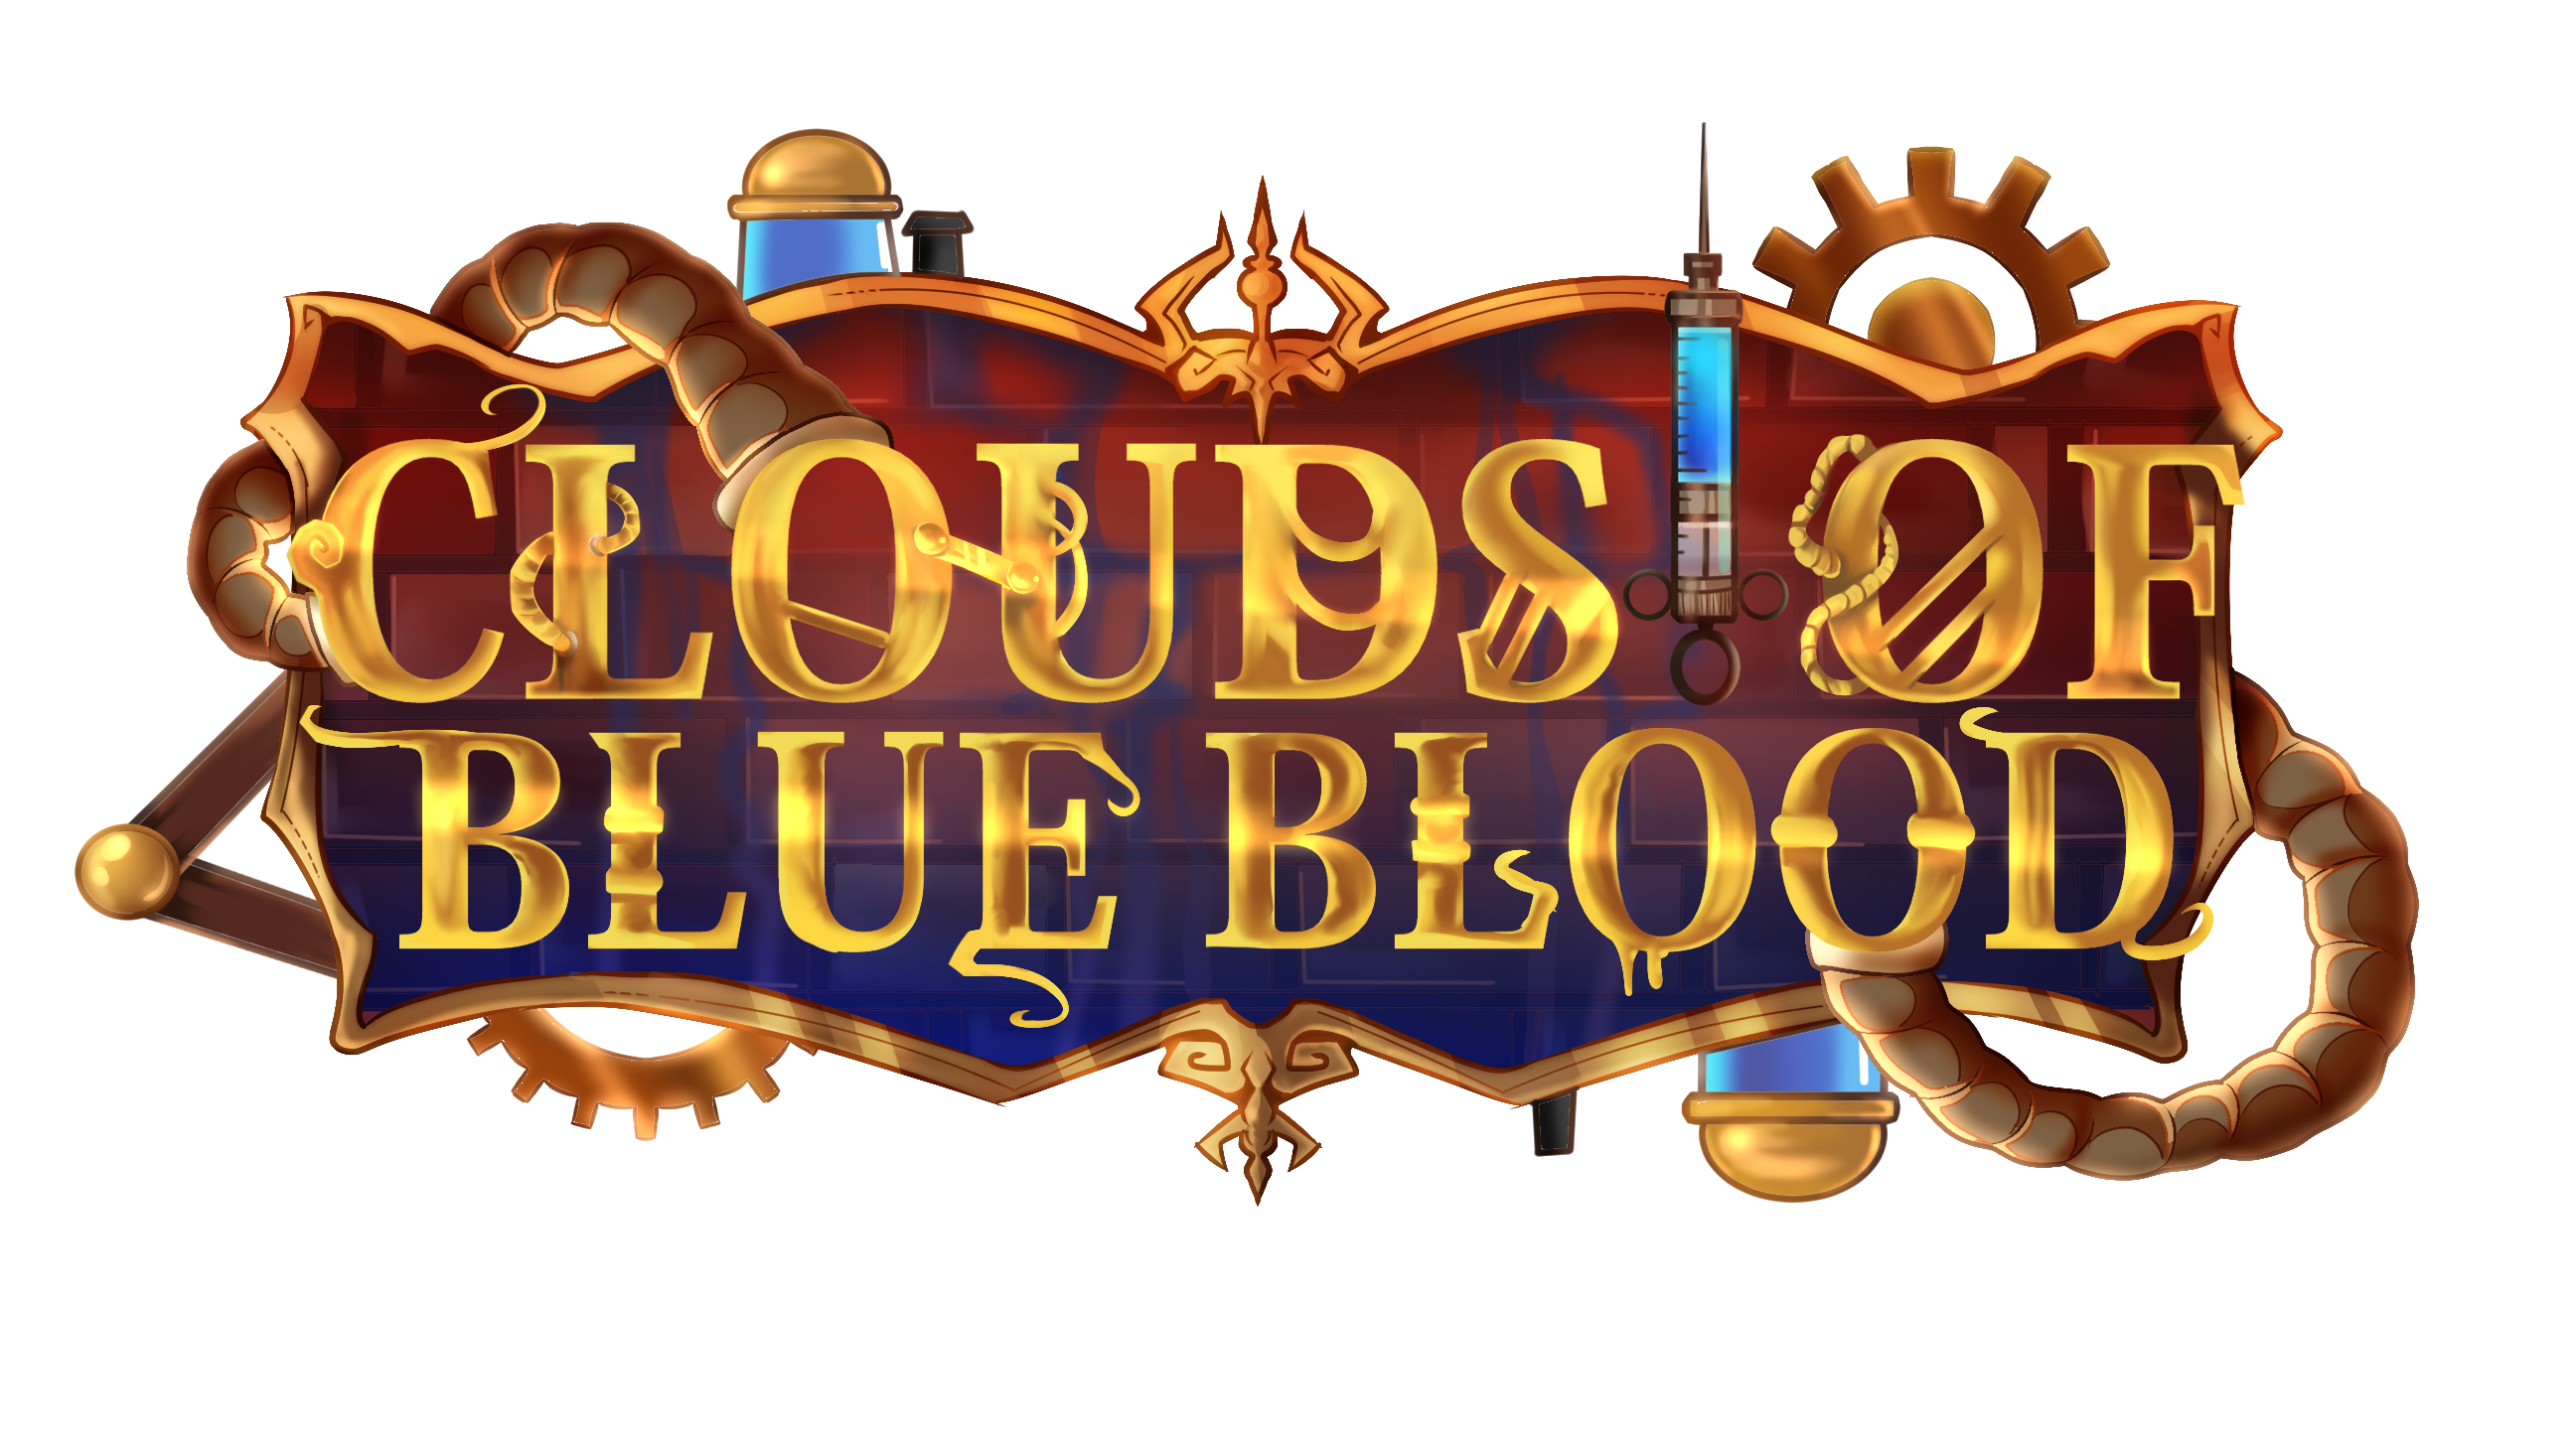 Clouds of Blue Blood